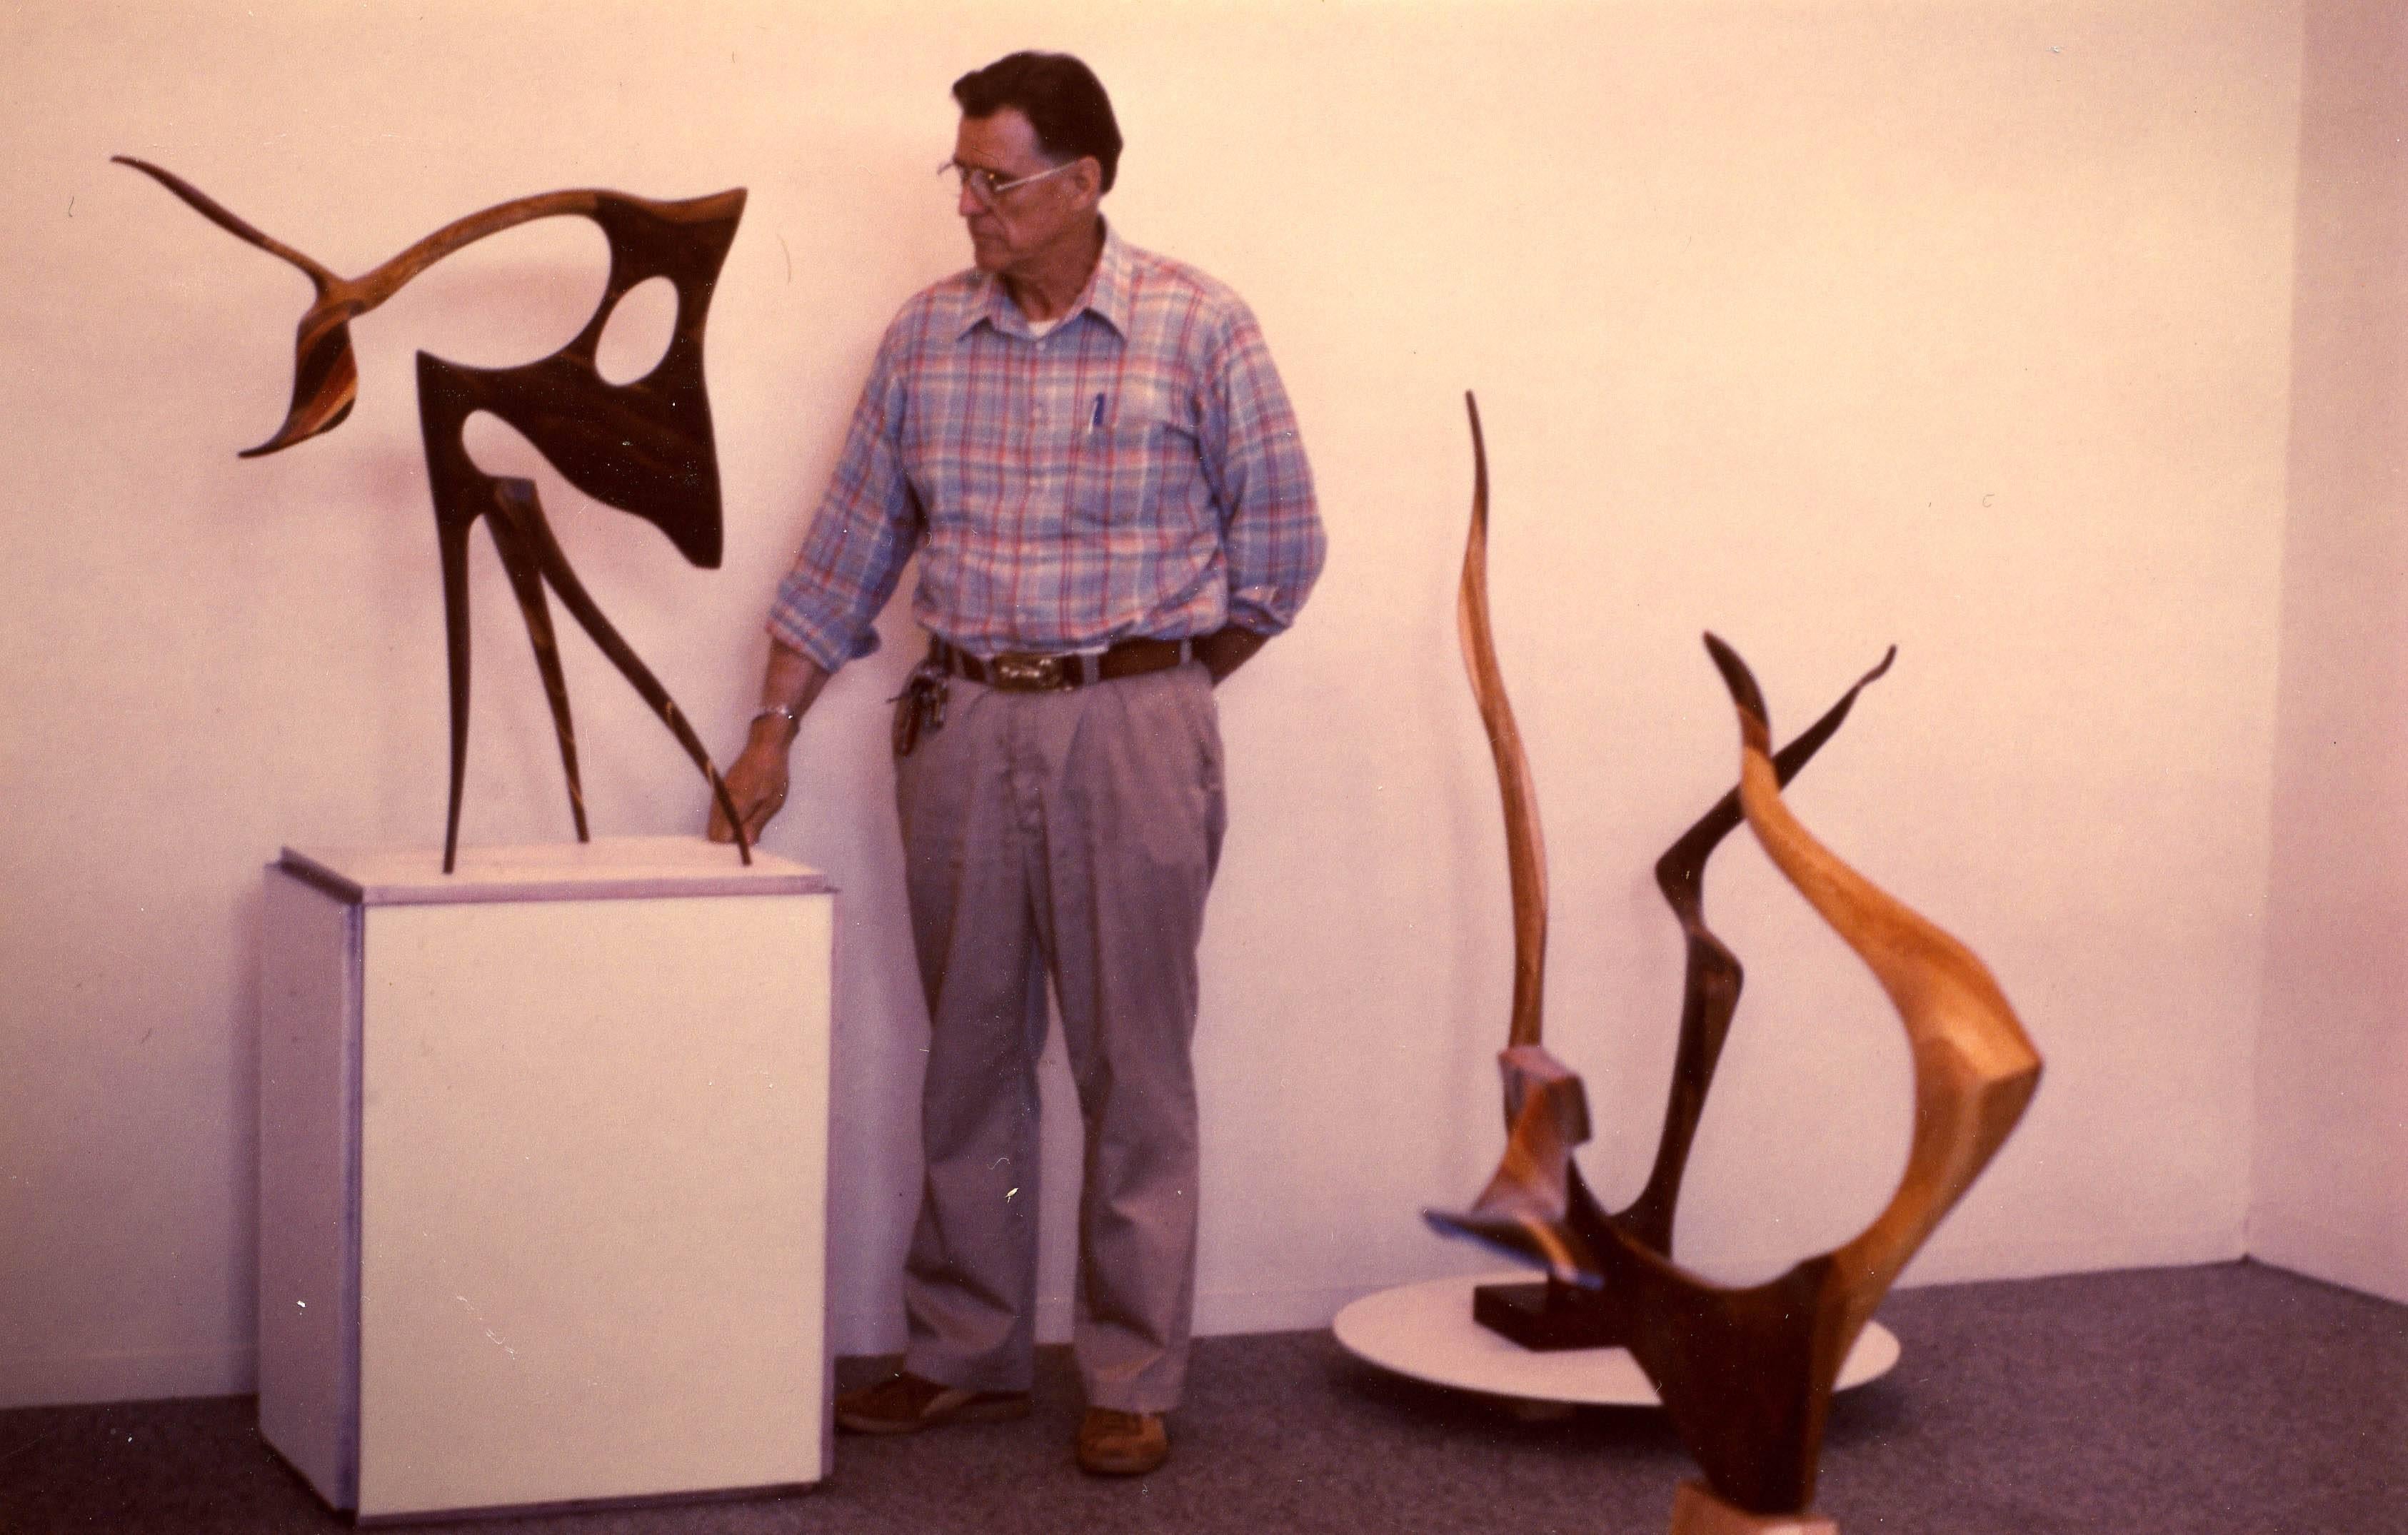 Unique hand-carved walnut sculpture by Jack Rogers Hopkins. USA, circa 1970. A unique sculpture by Jack Rogers Hopkins in hand-carved and laminated American walnut, Honduran mahogany and white oak. The contrast of grains in the laminate accentuate